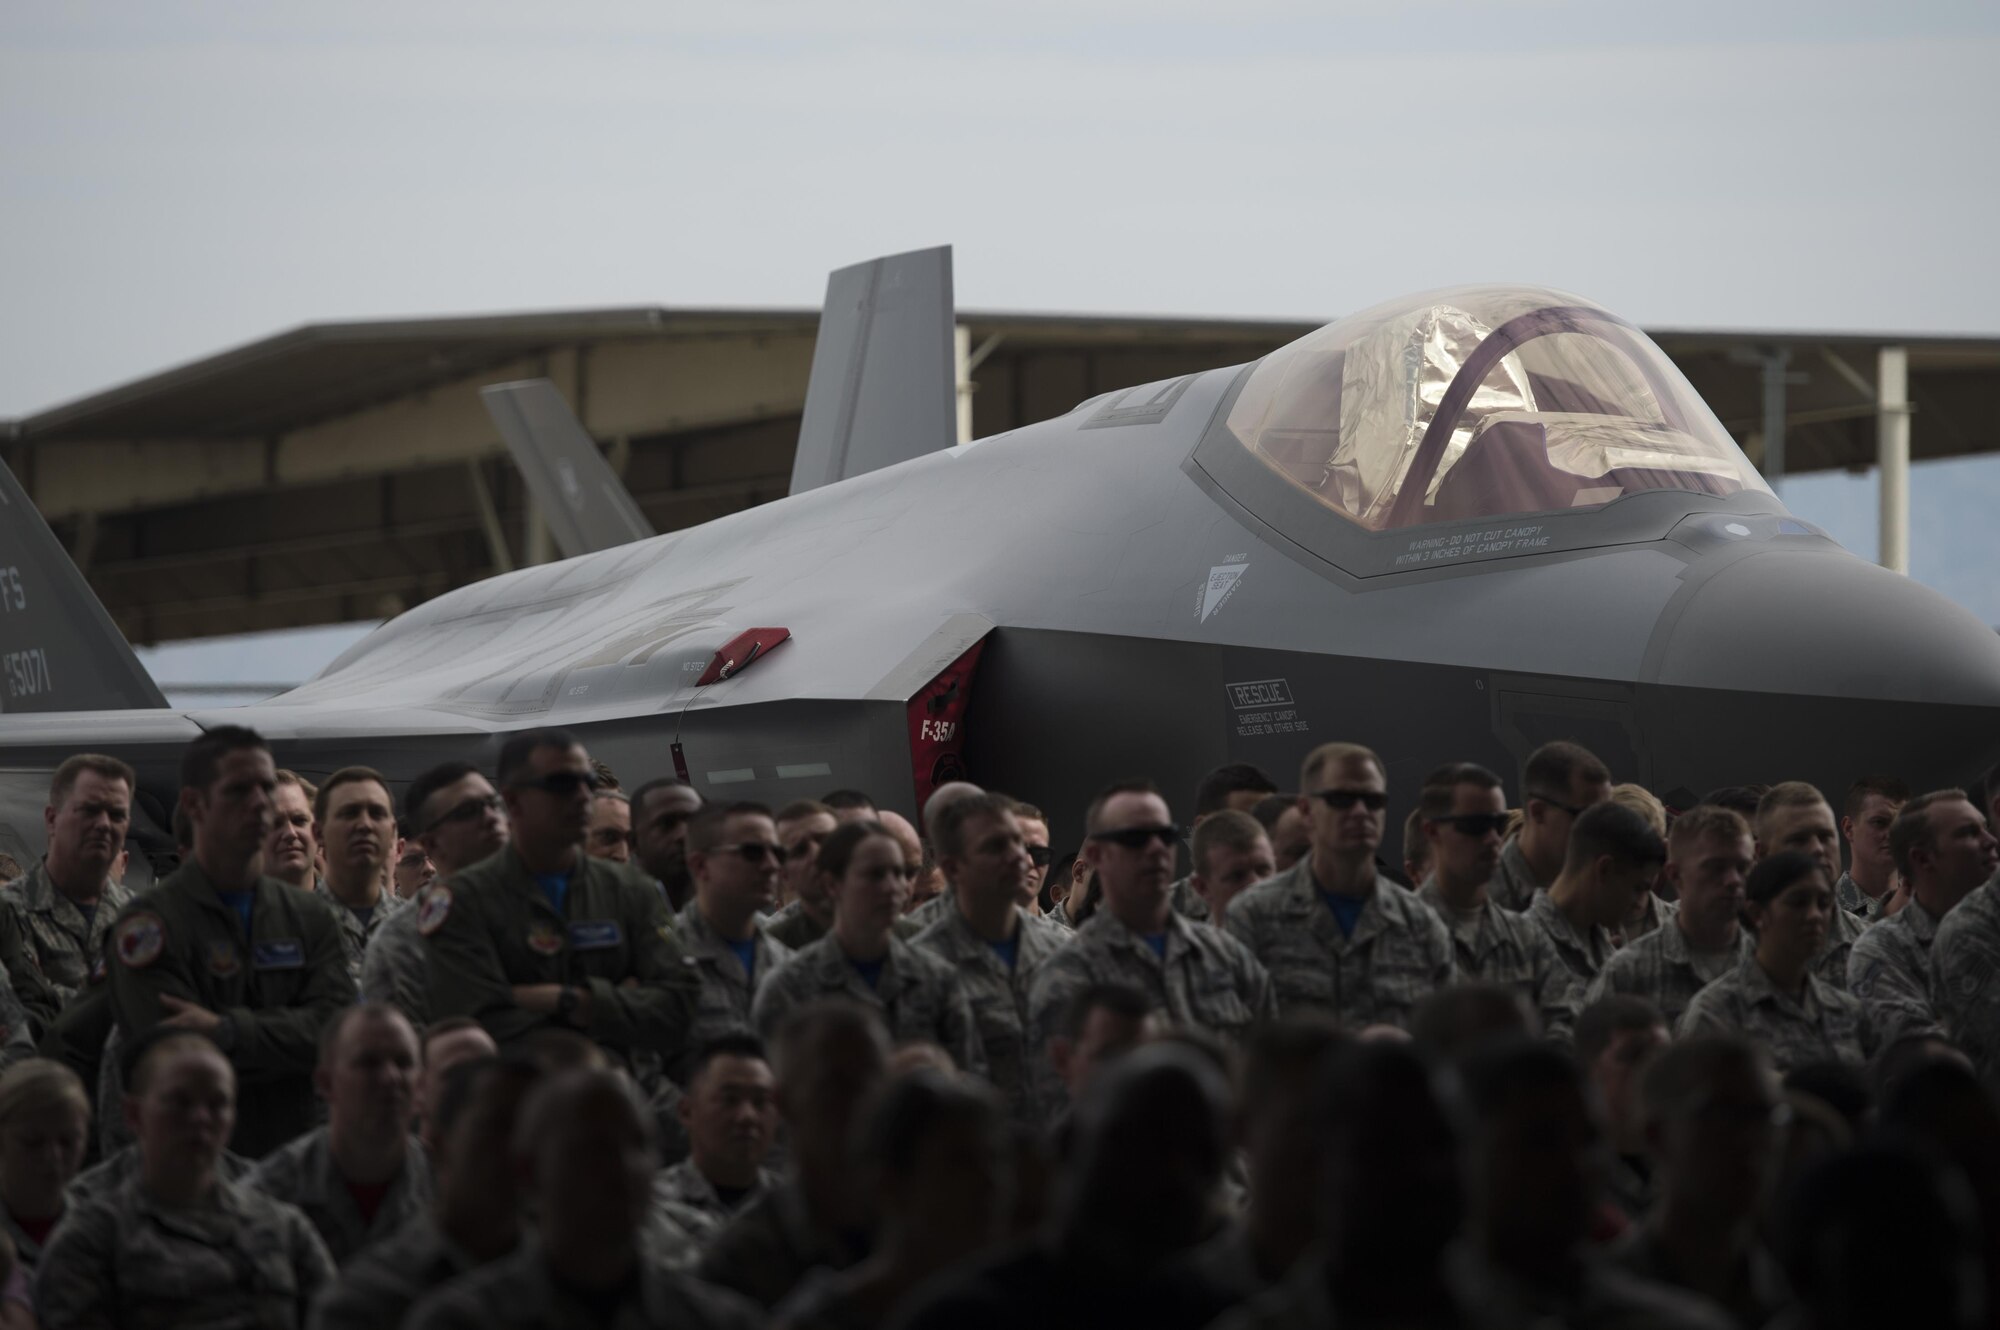 Hundreds of military and civilian Airmen attend the F-35A Lightning II aircraft initial operational capability ceremony Aug. 5 at Hill Air Force Base, Utah. (U.S. Air Force photo by Staff Sgt. Andrew Lee)